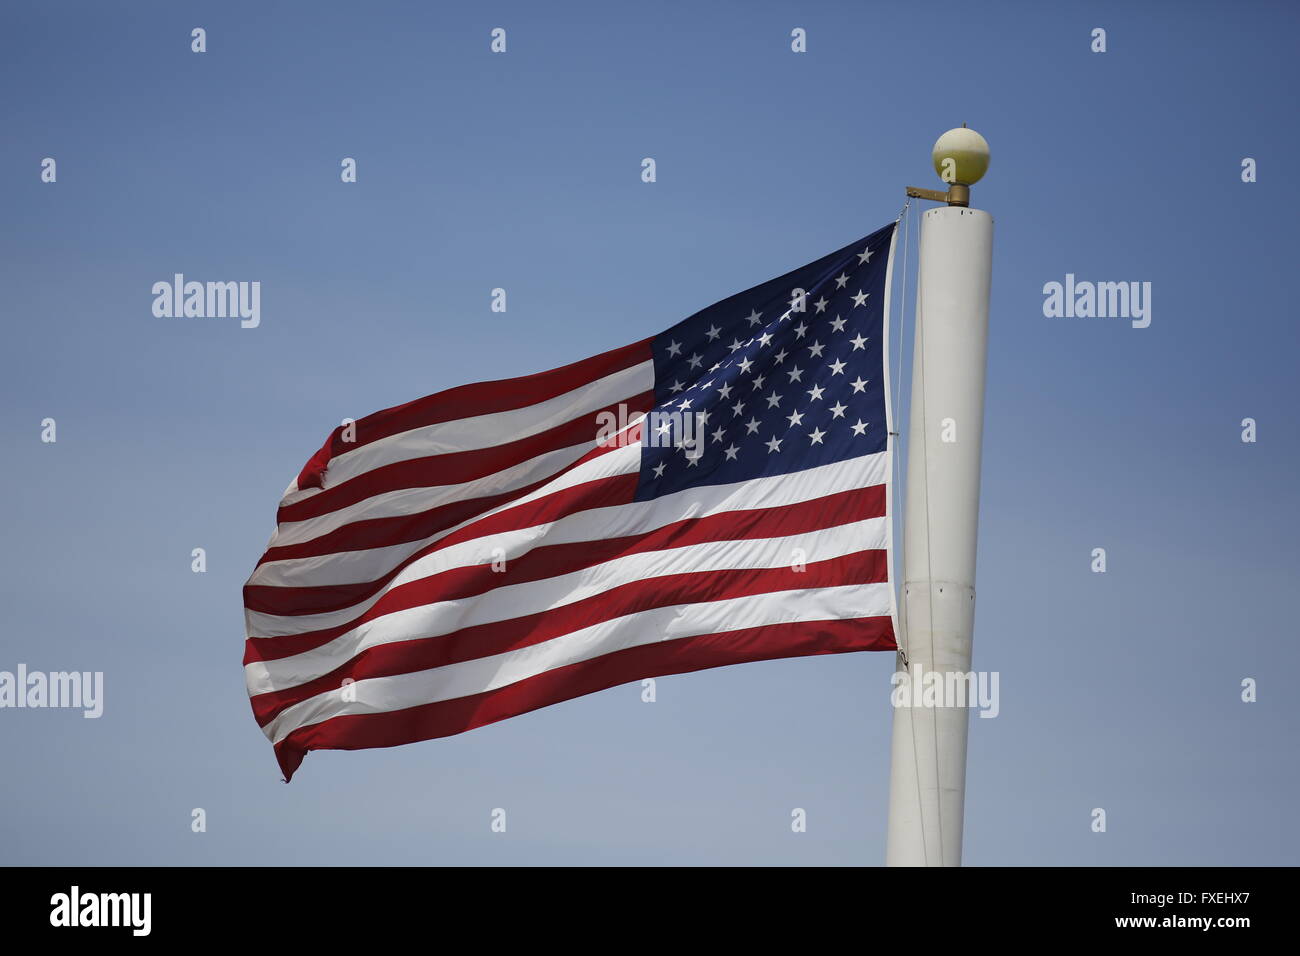 Unites States flag flying on cell phone tower. Stock Photo